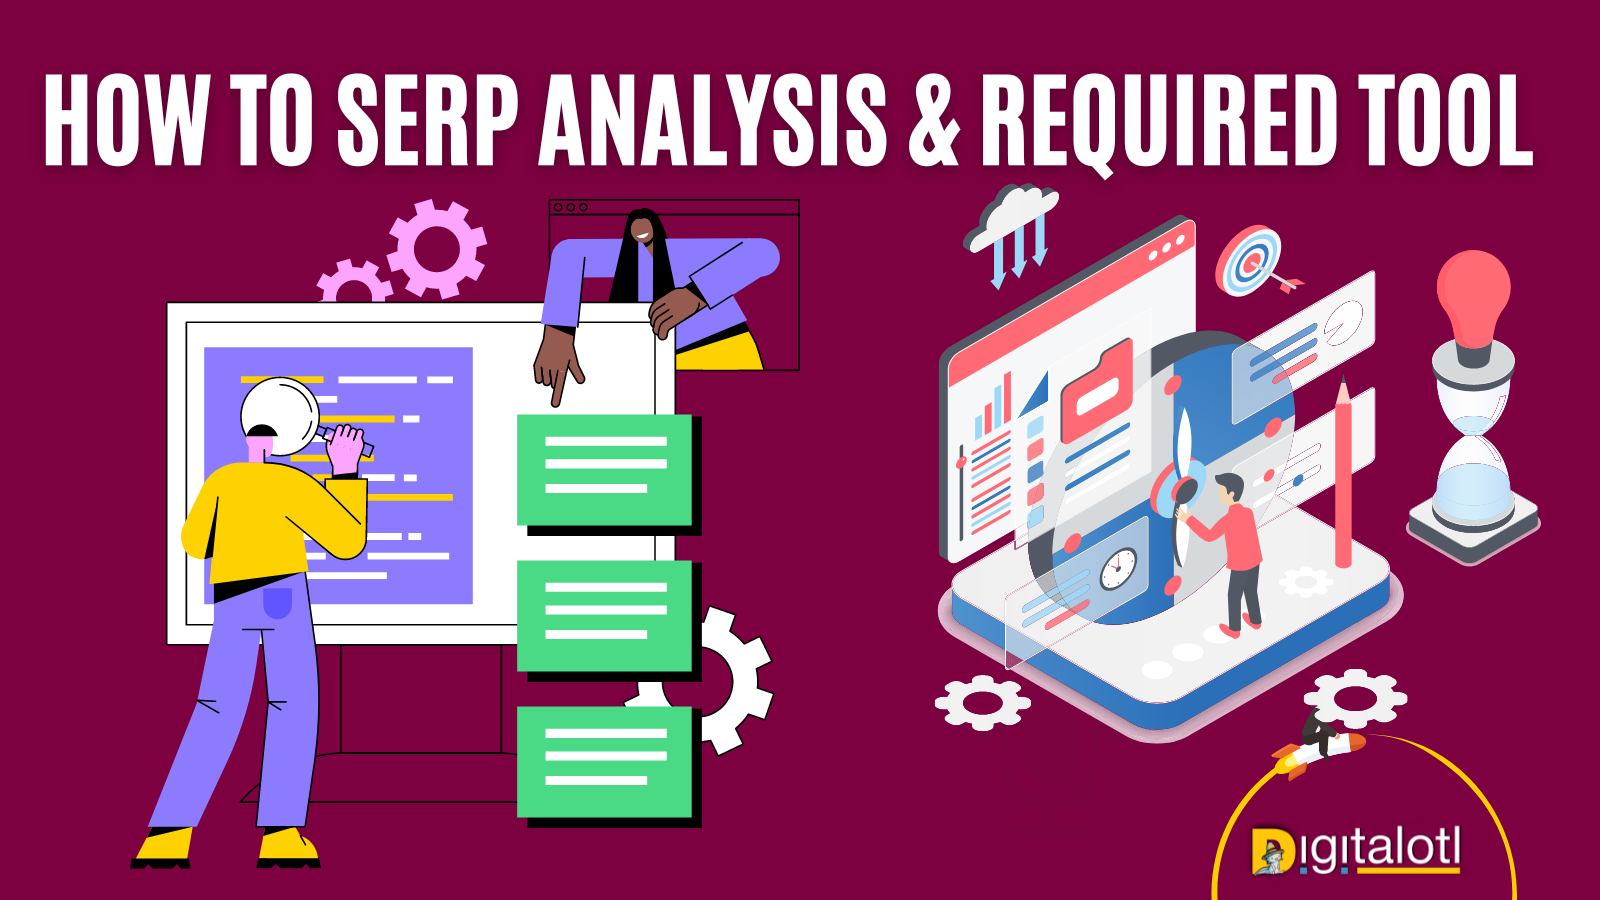 How to SERP Analysis & Required Tool